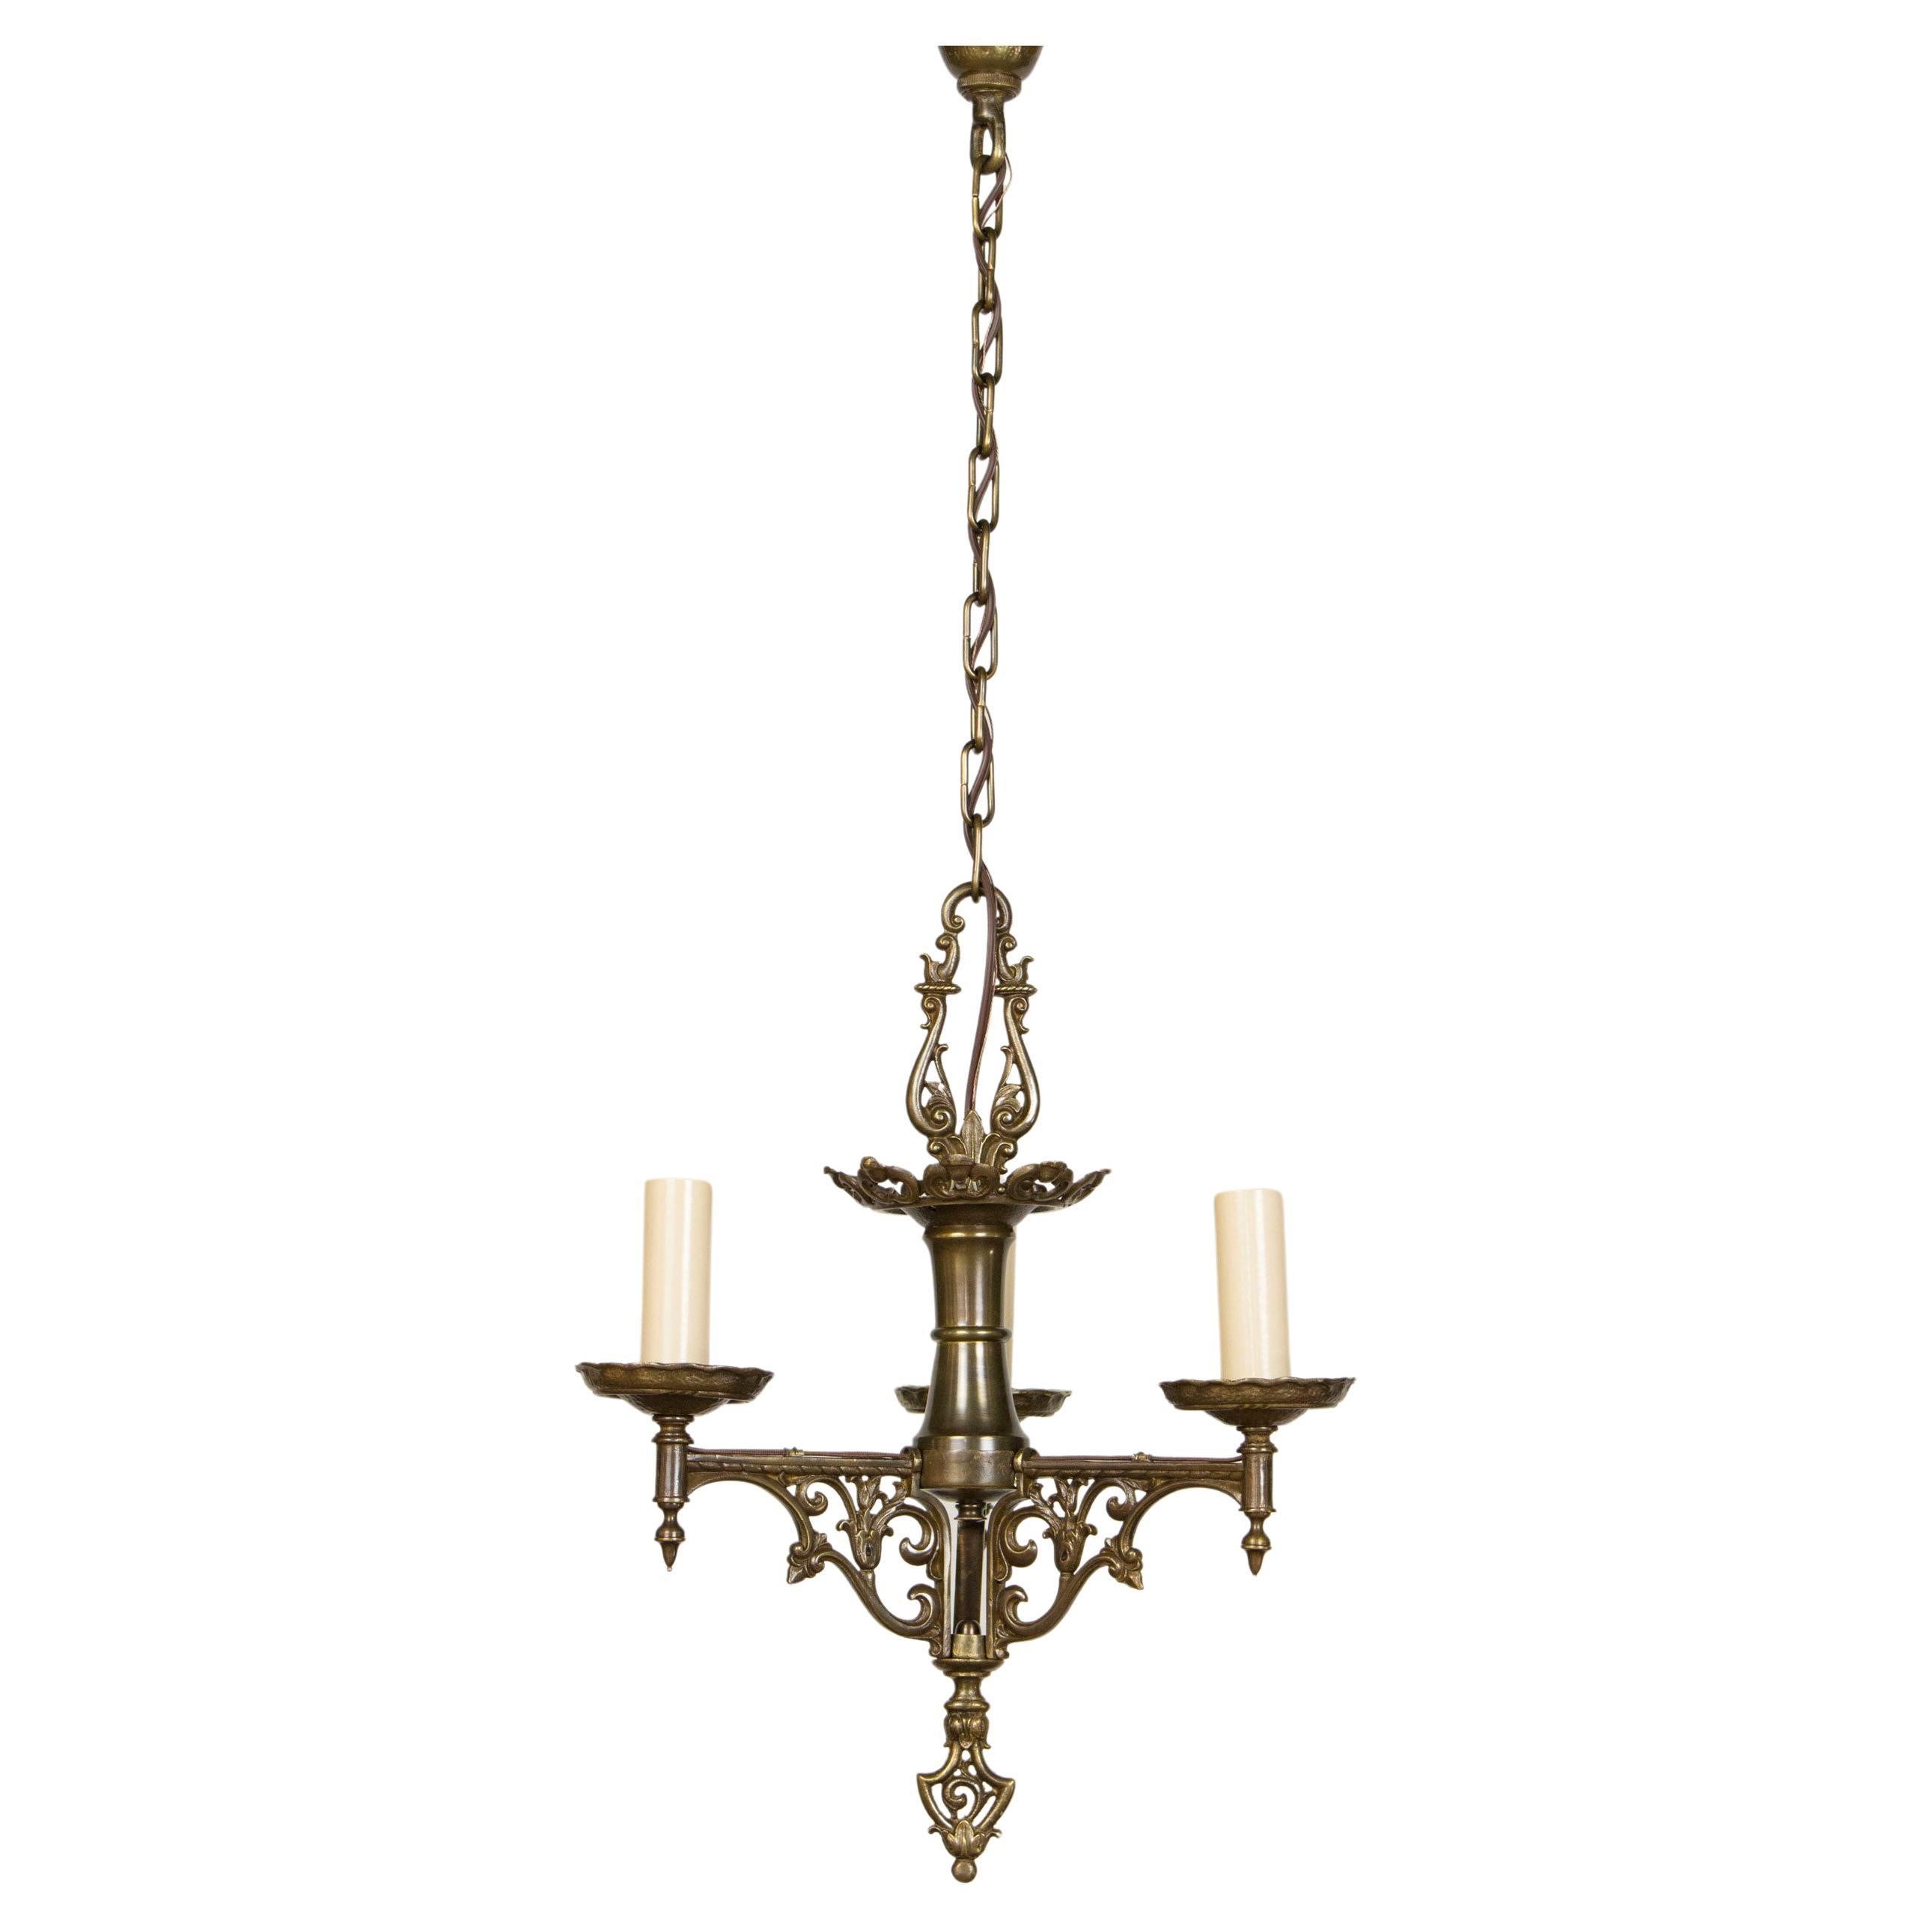 Early 20th Century Three Arm Spanish Revival Brass Chandelier For Sale